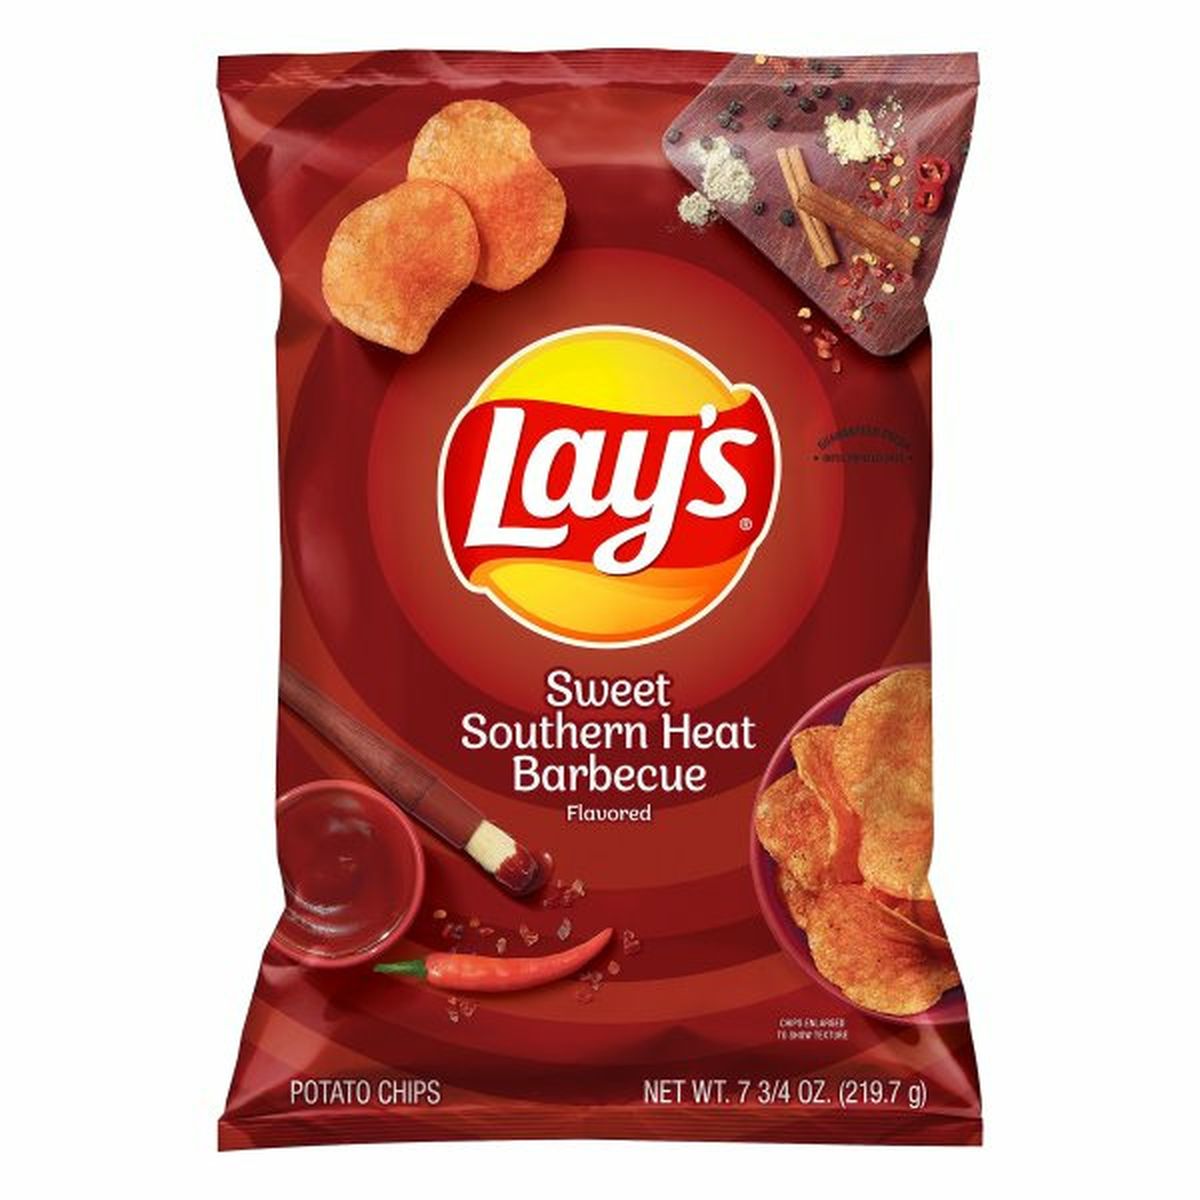 Calories in Lay's Potato Chips, Sweet Southern Heat Barbecue Flavored